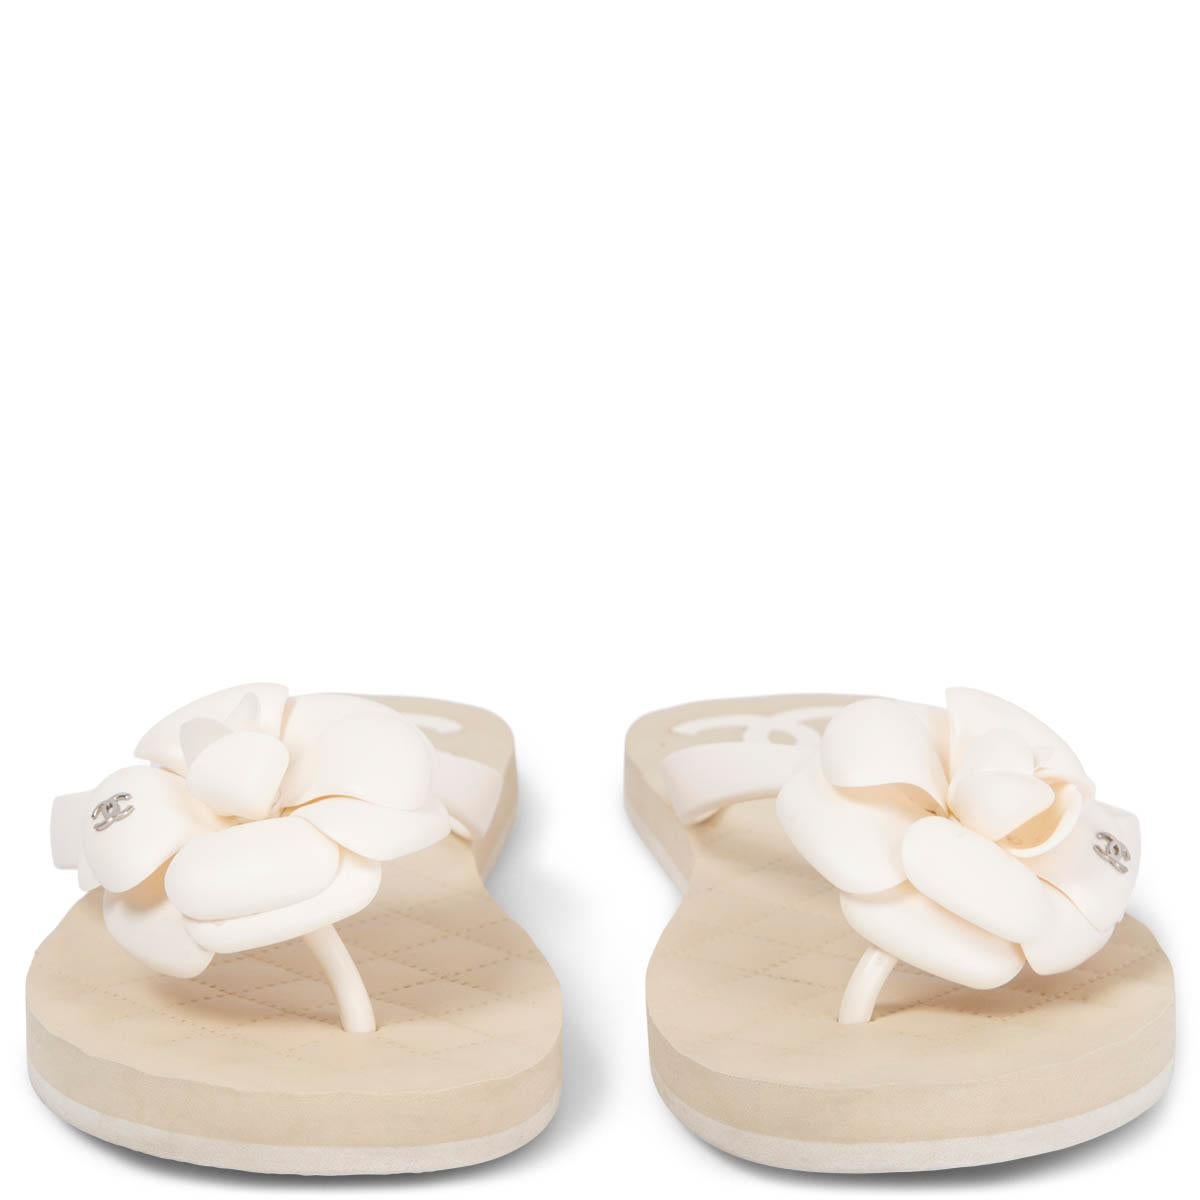 100% authentic Chanel thongs sandals in ivory & sand rubber embellished with a rubber Camellia and CC silver-tone metal logo. Have been worn and show very soft marks on the Camellia, one small leaf fell off and there are a few soft marks on the